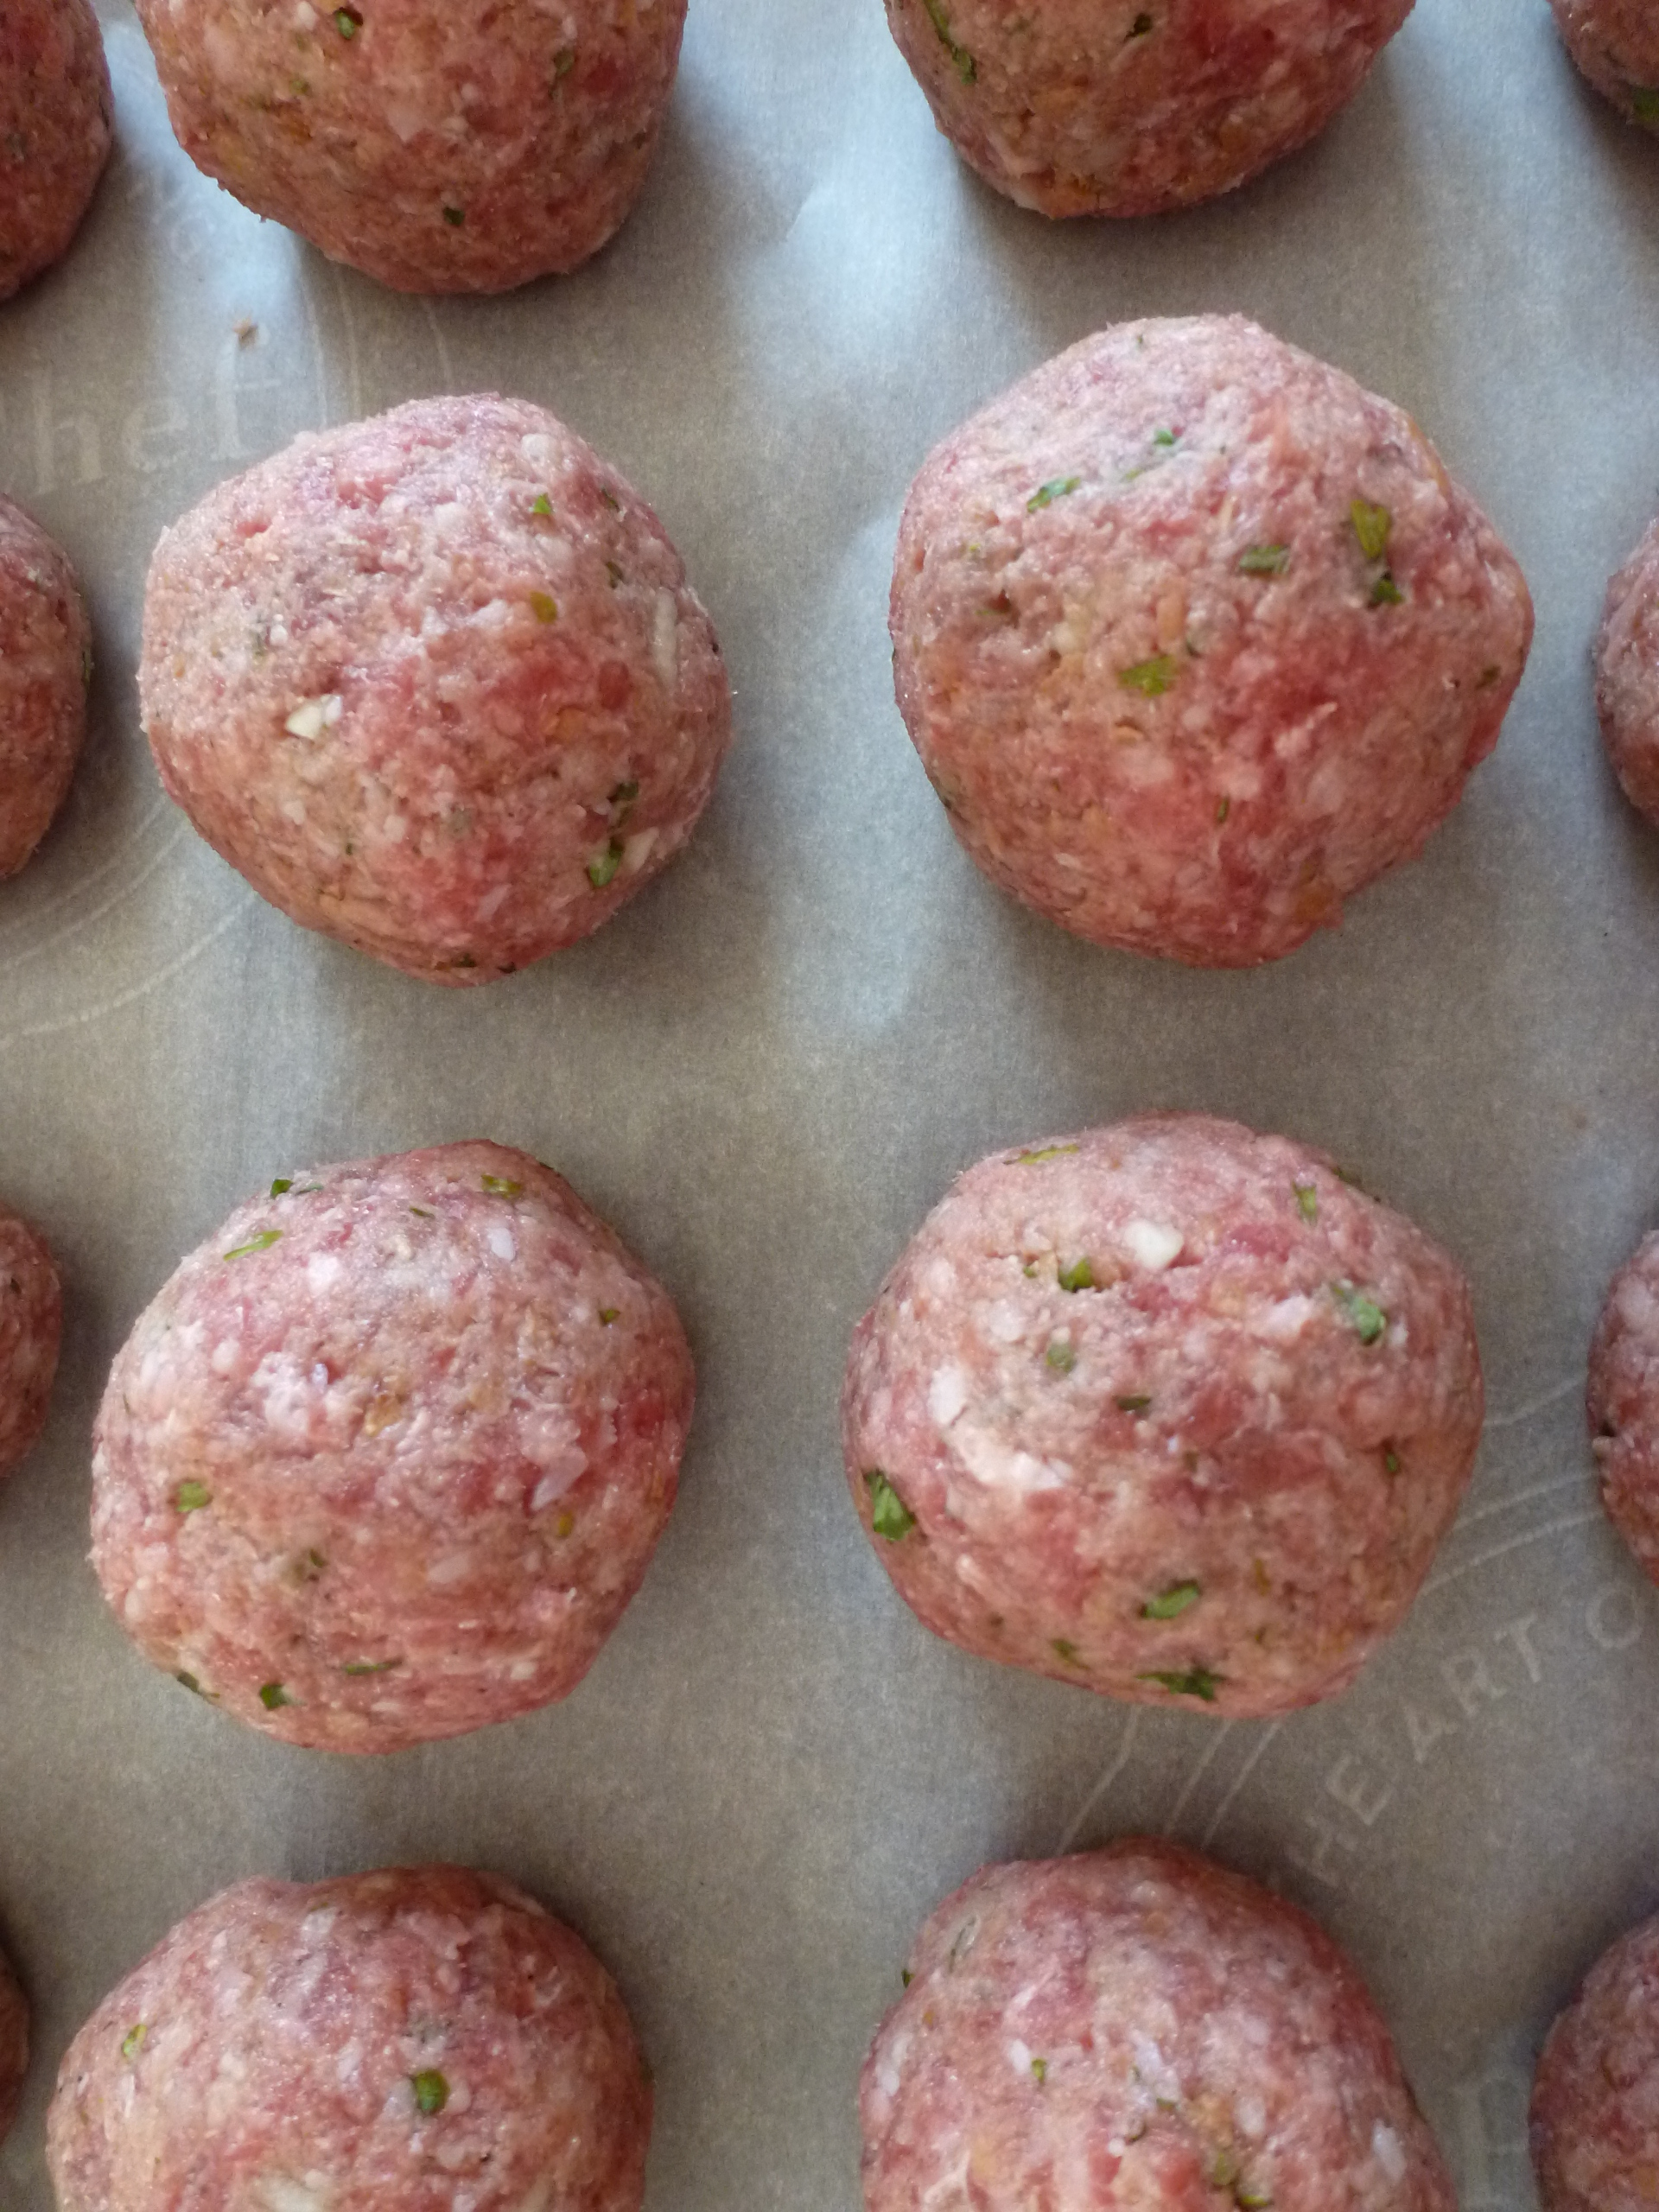 Raw meatballs, ready for the oven